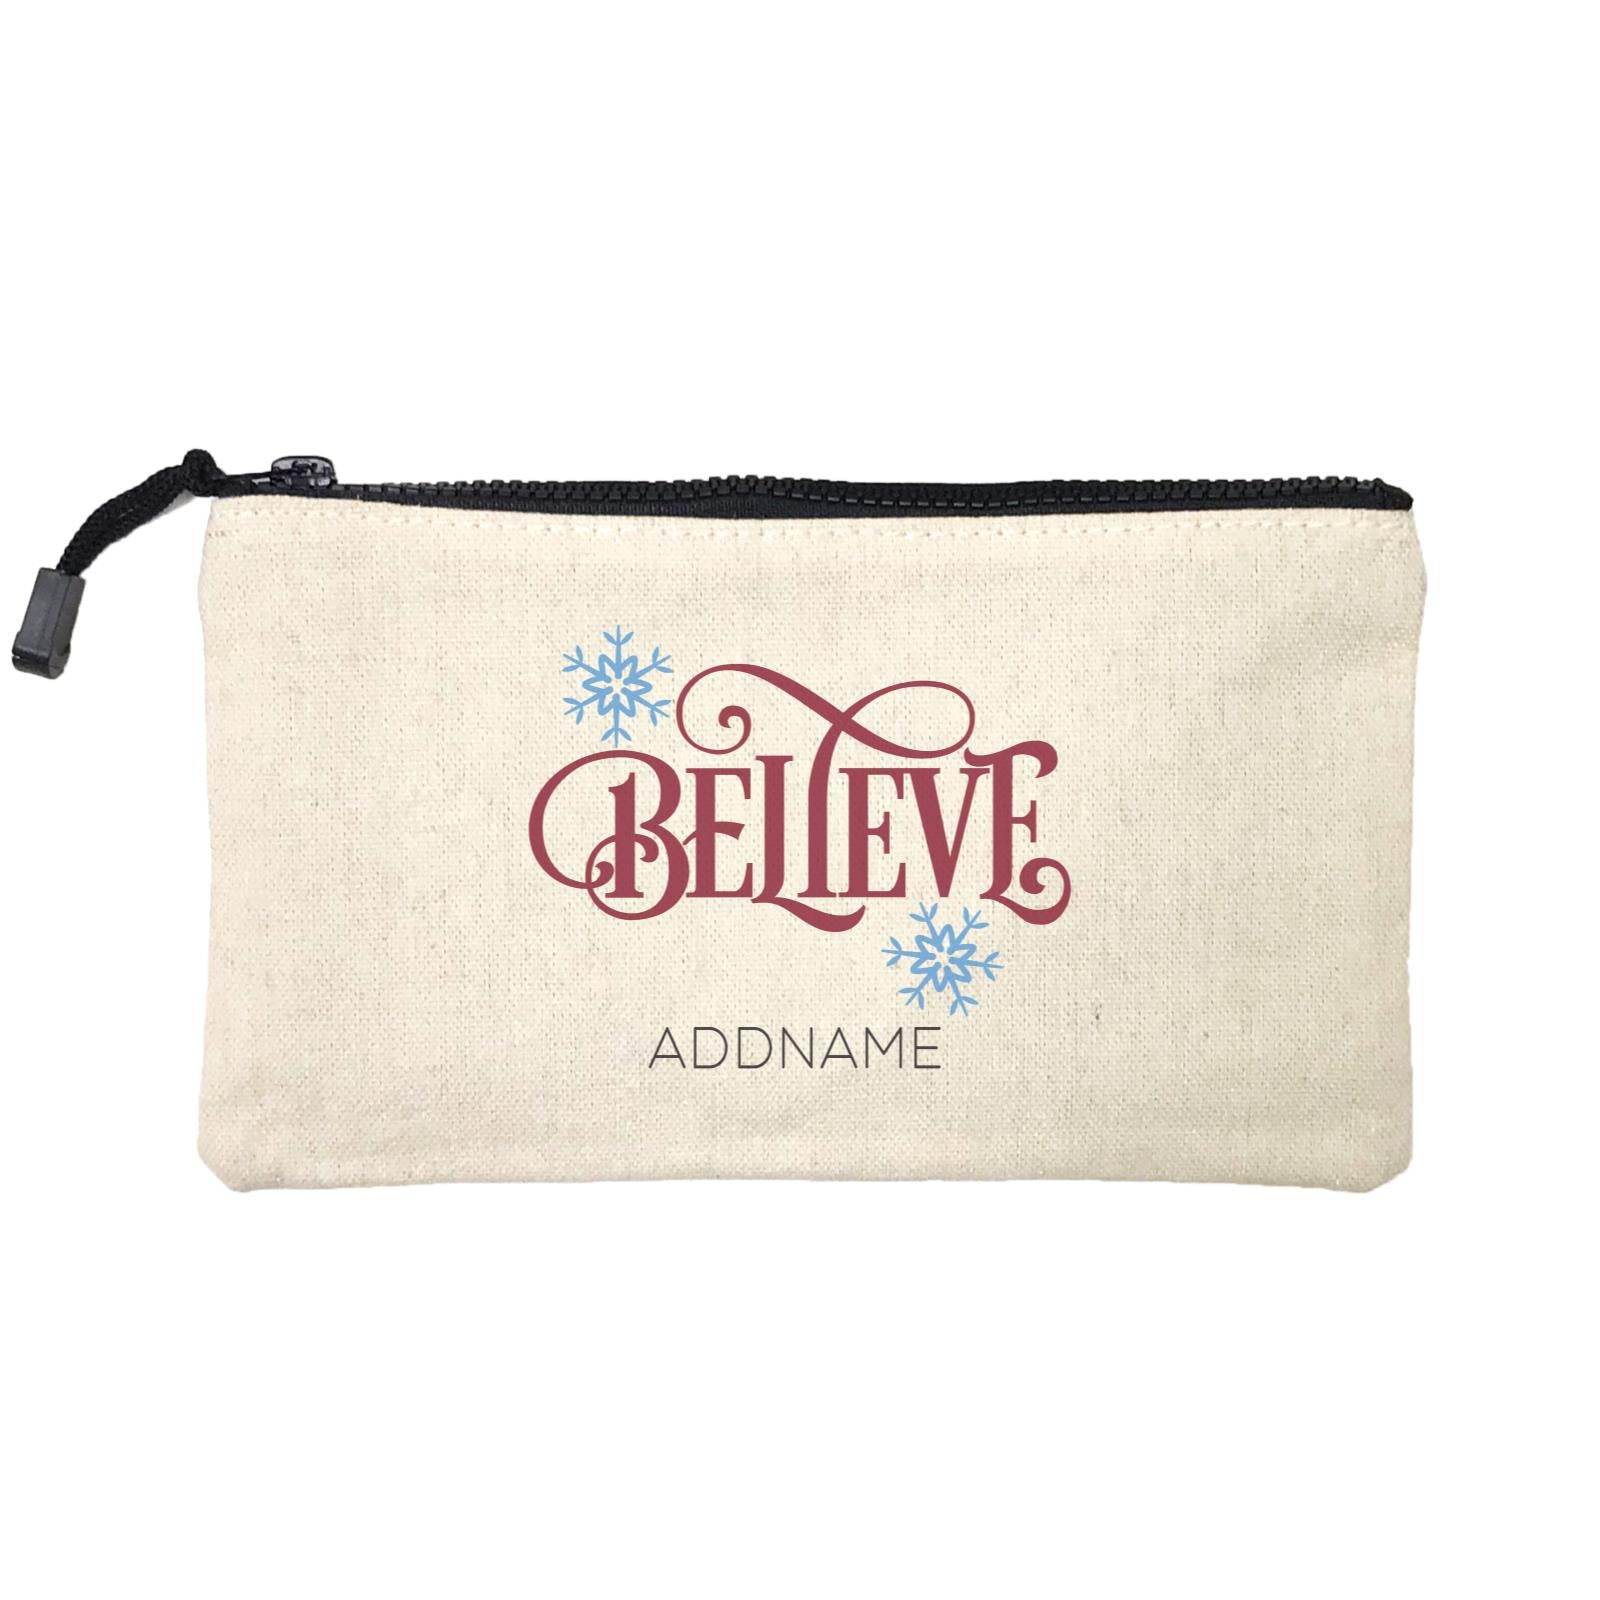 Xmas Believe with Snowflakes Mini Accessories Stationery Pouch